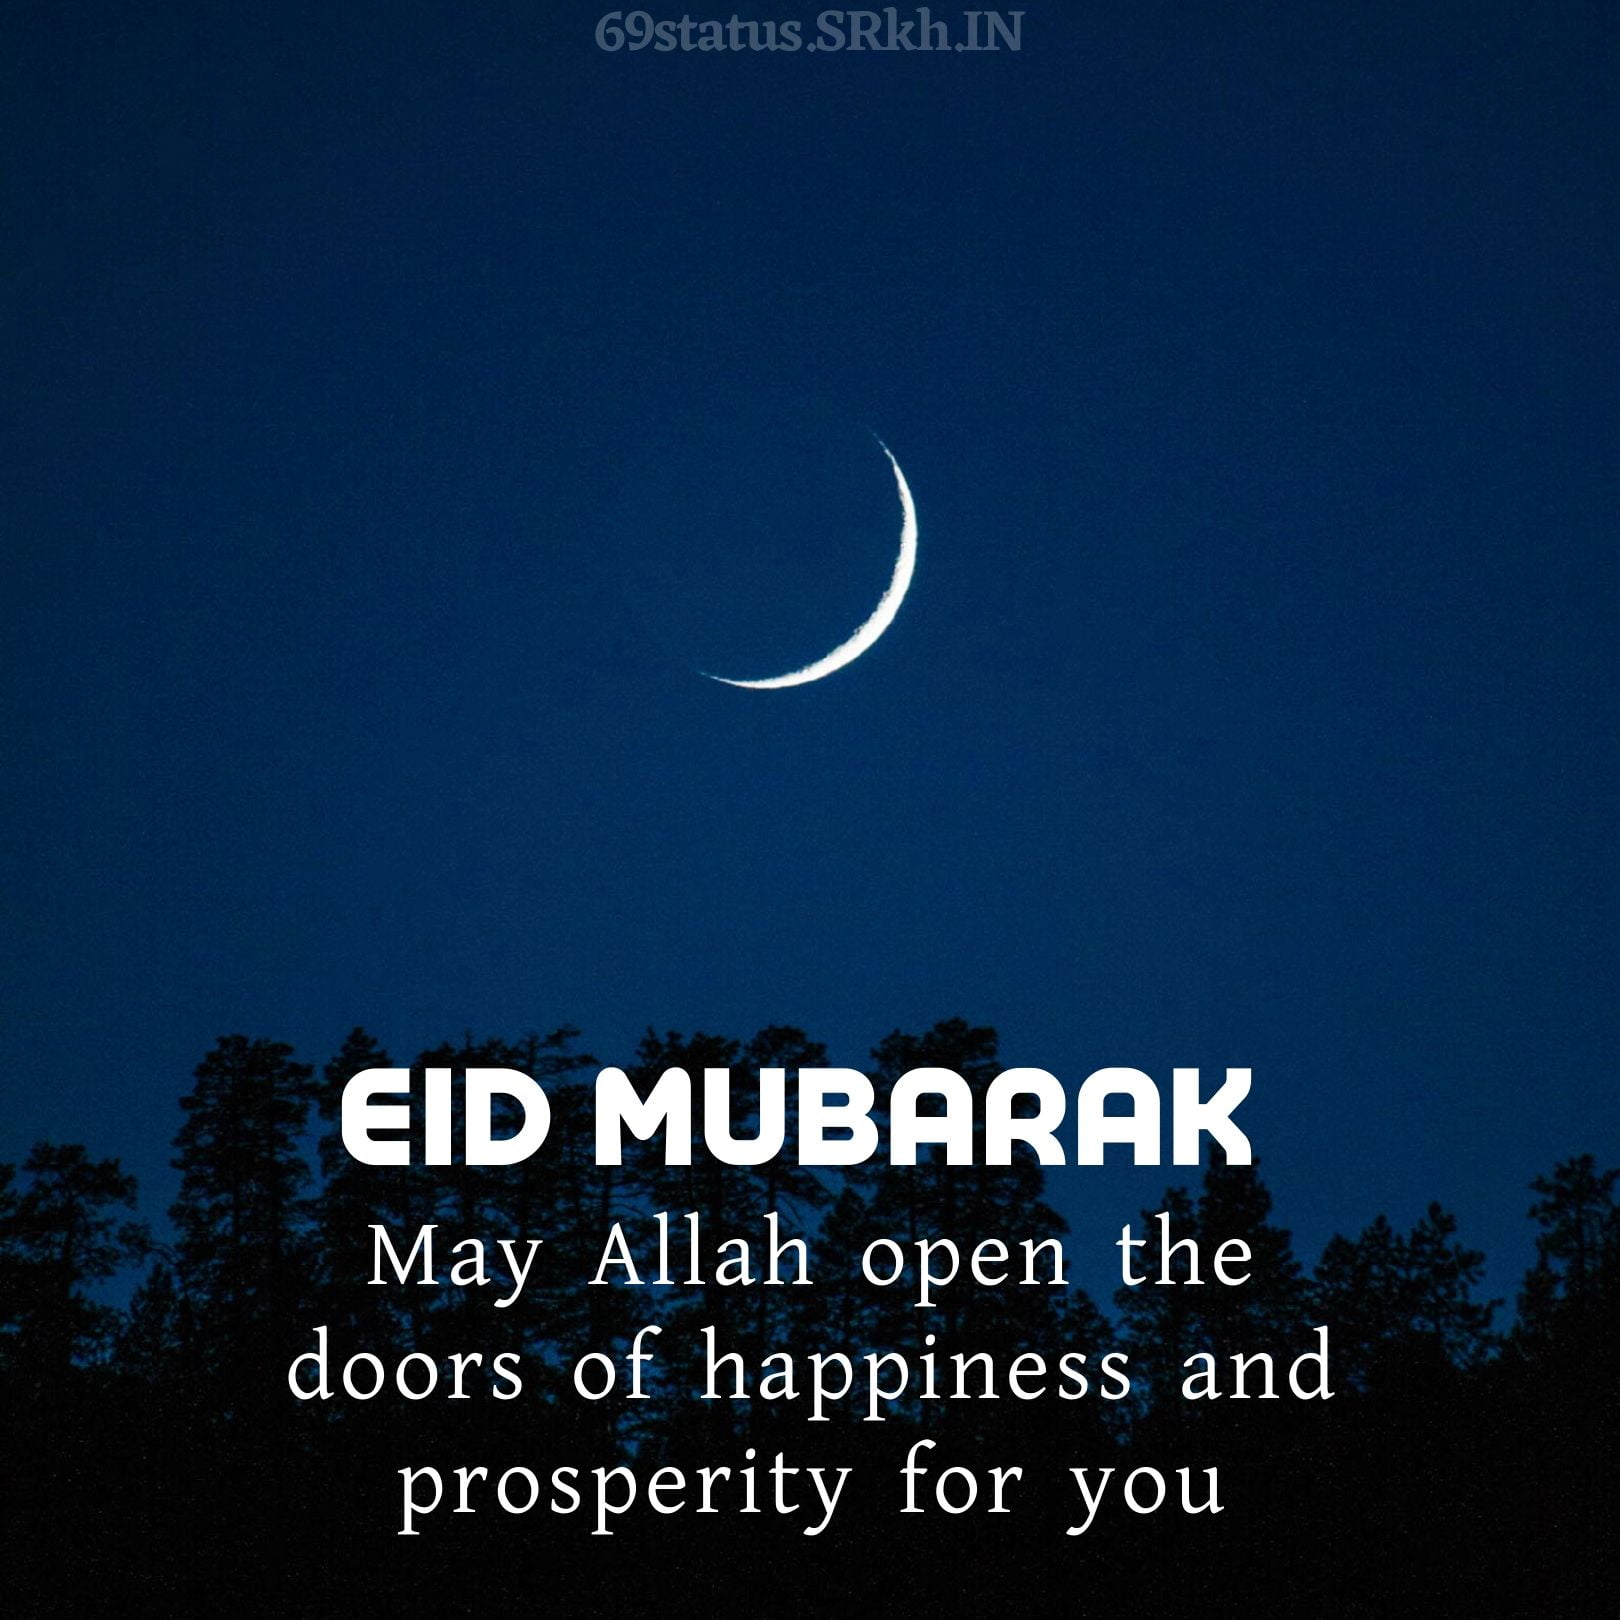 Eid Mubarak Image quote. May Allah open the doors of happiness and prosperity for you